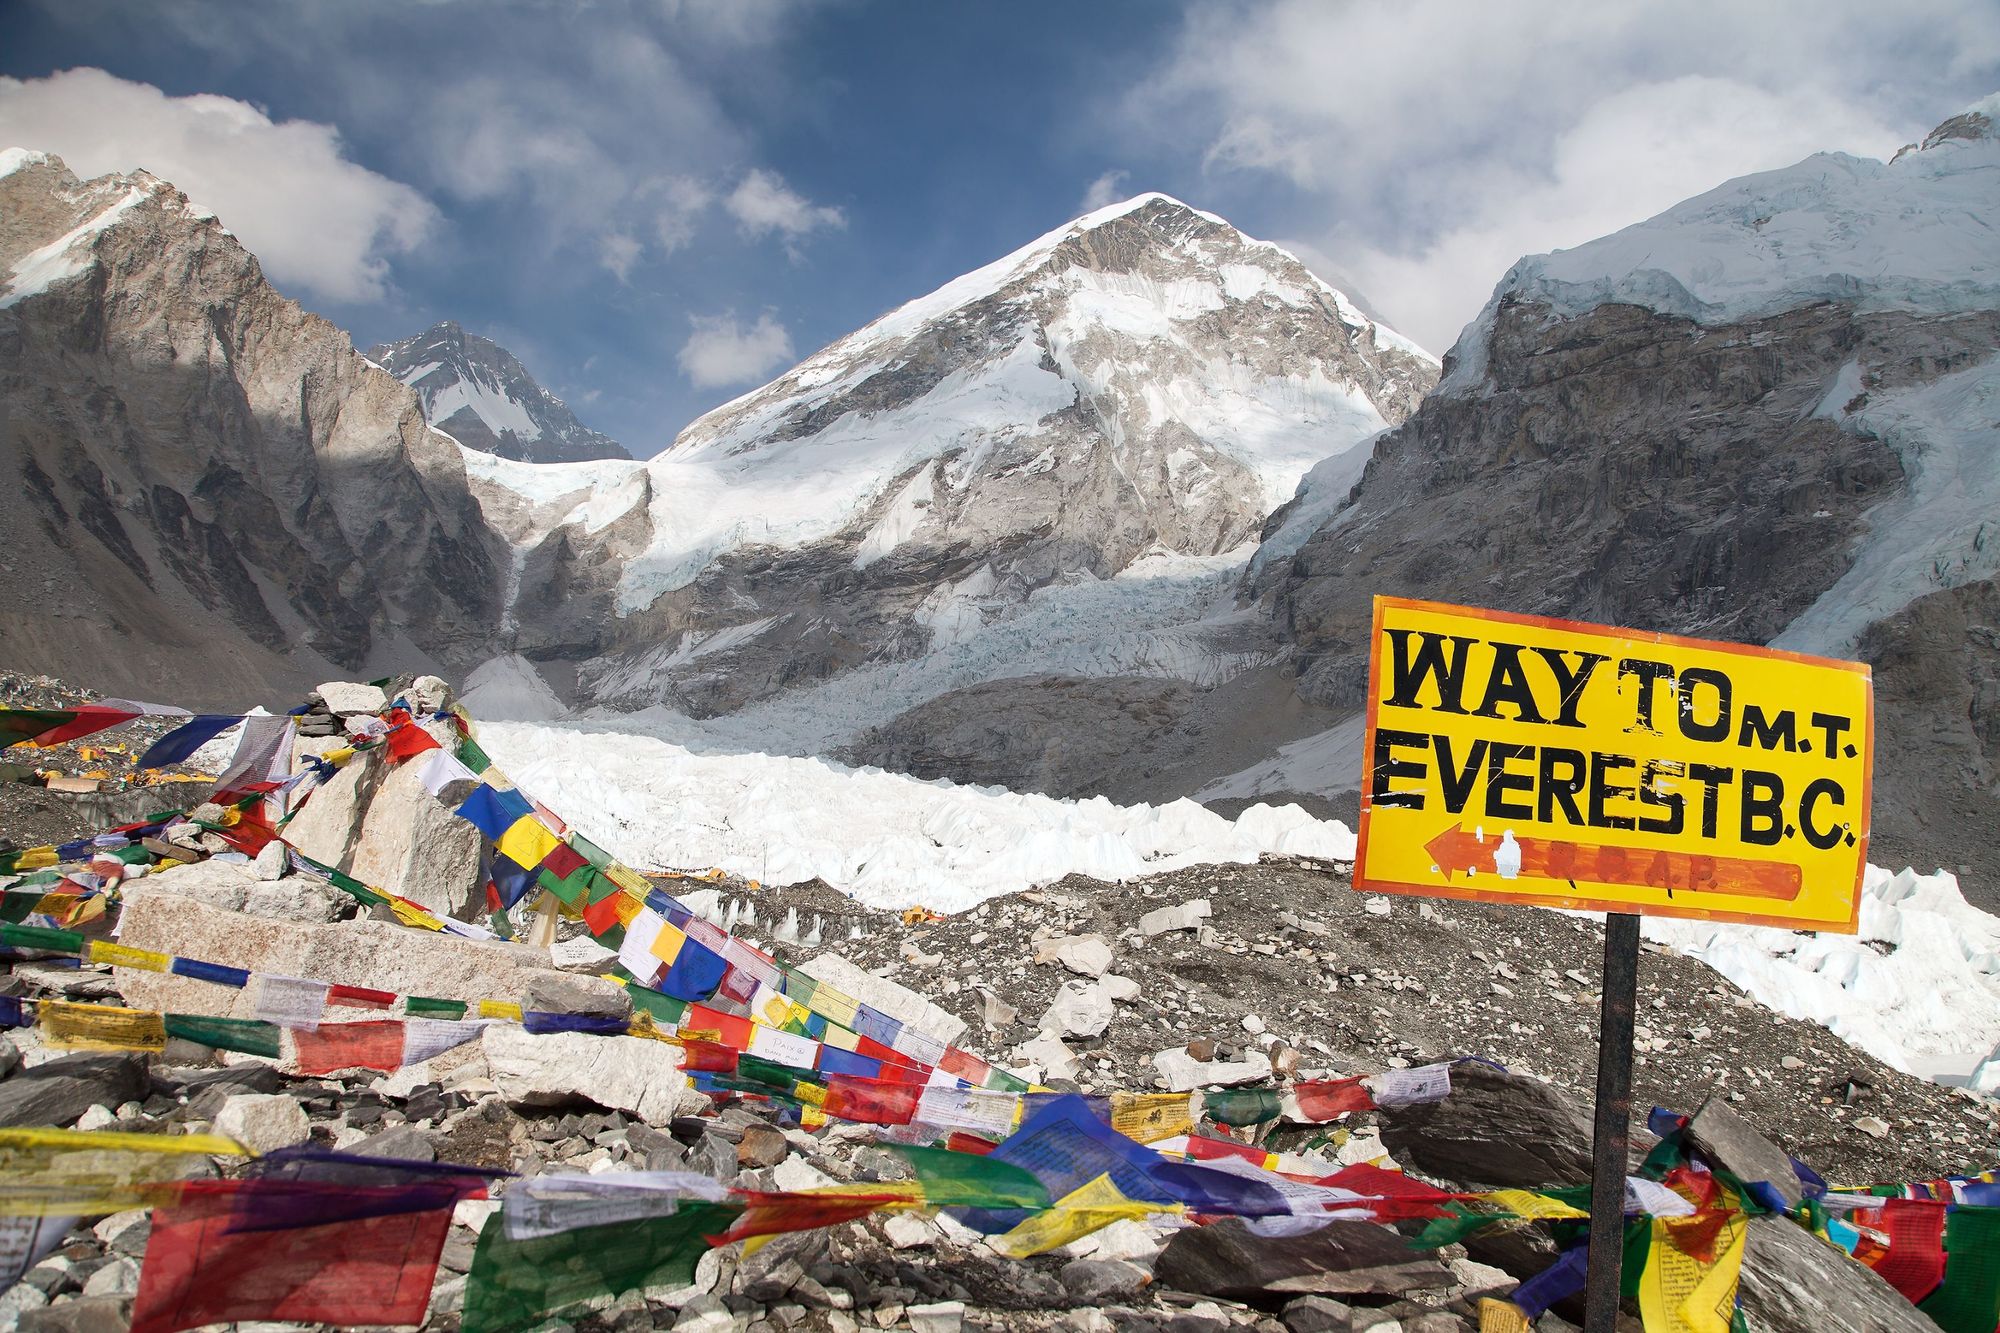 The Everest Base Camp sign surrounded by prayer flags, with a snowcapped peak in the background.